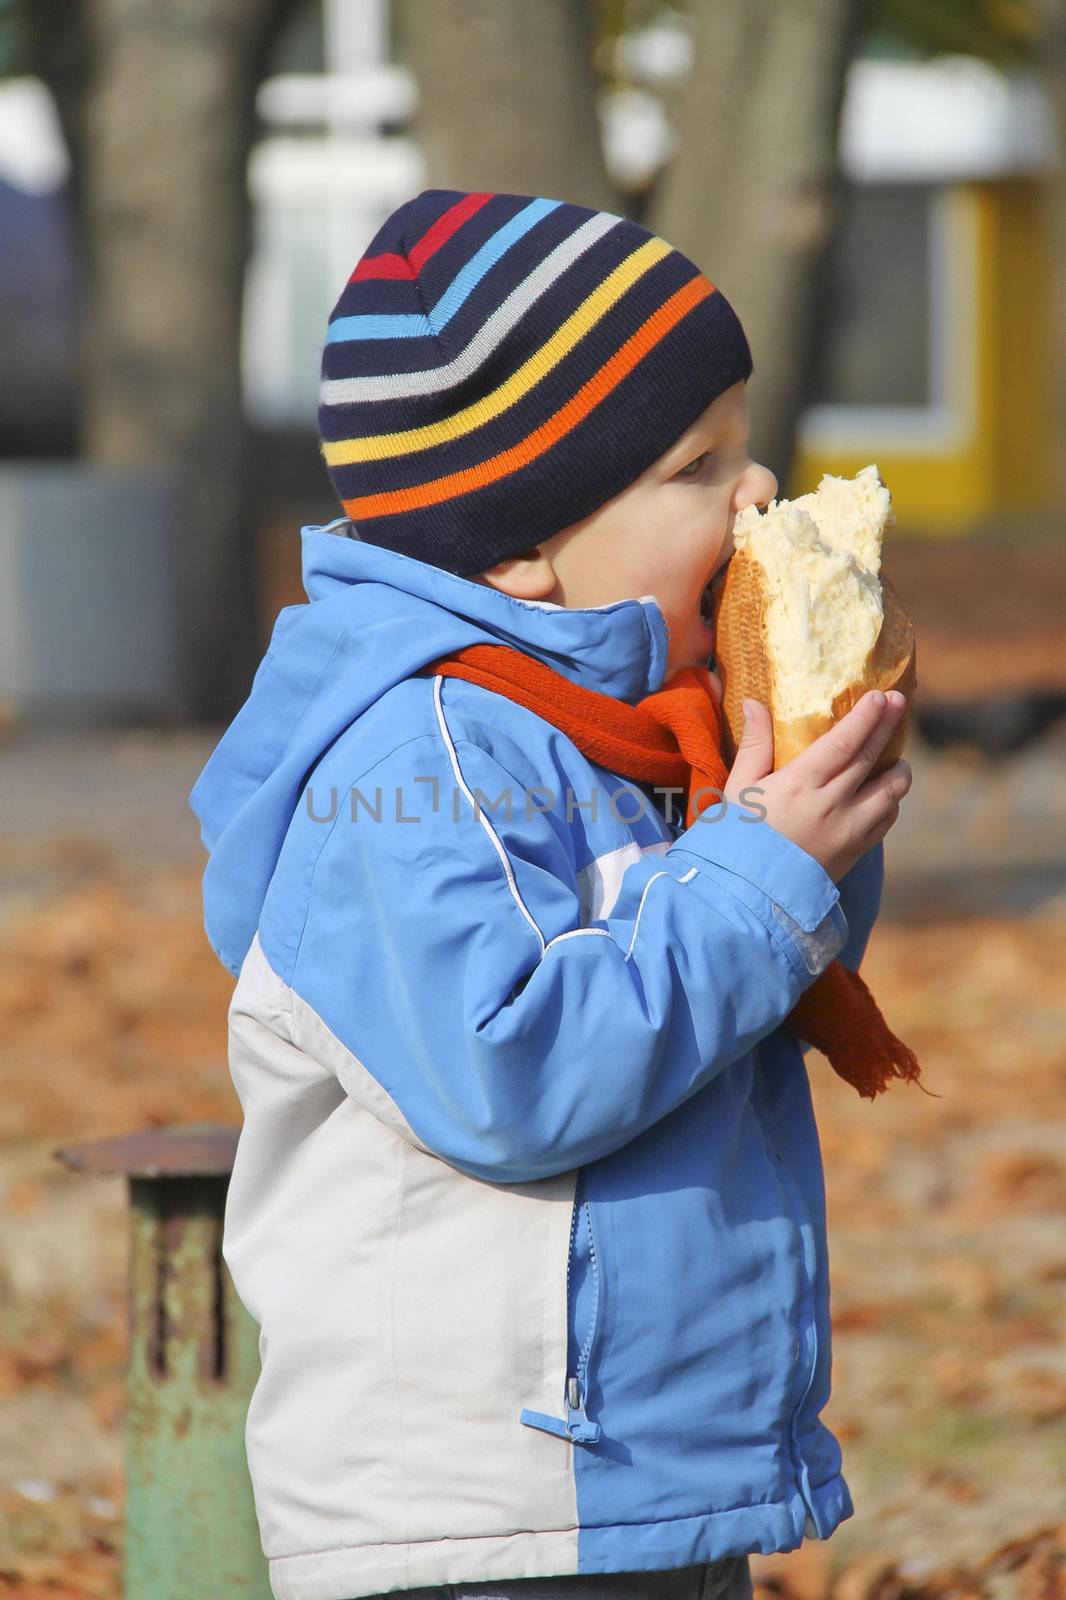 The kid eats bread during autumn walk in the park